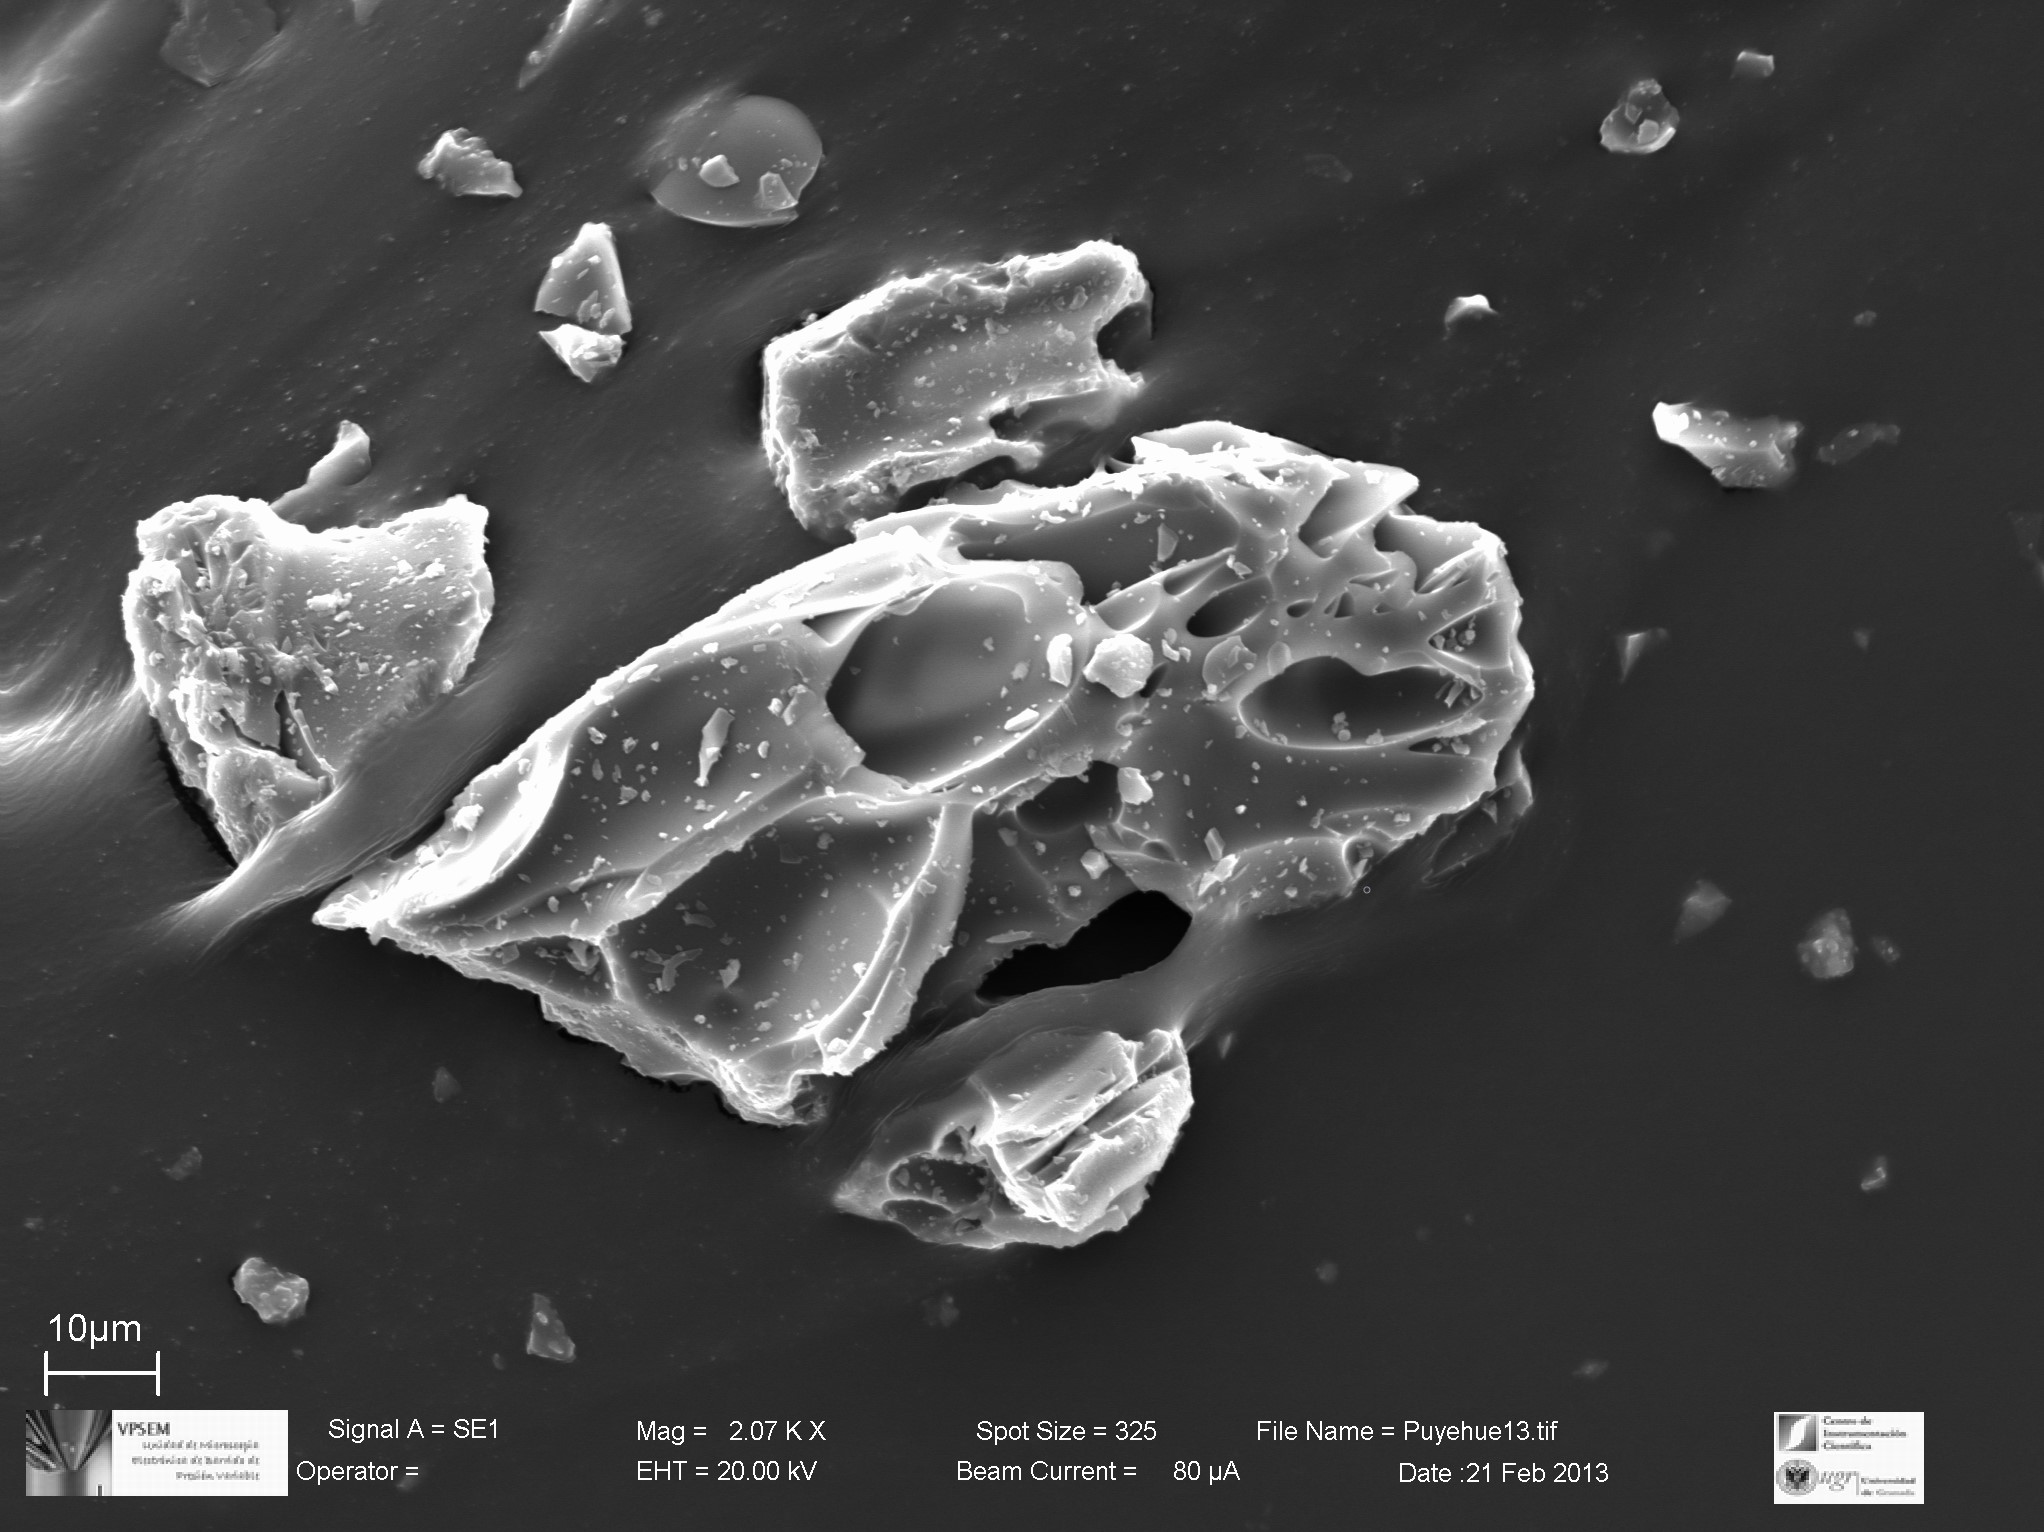 Scanning Electron Microscopy image of volcanic ash particles from Puyehue